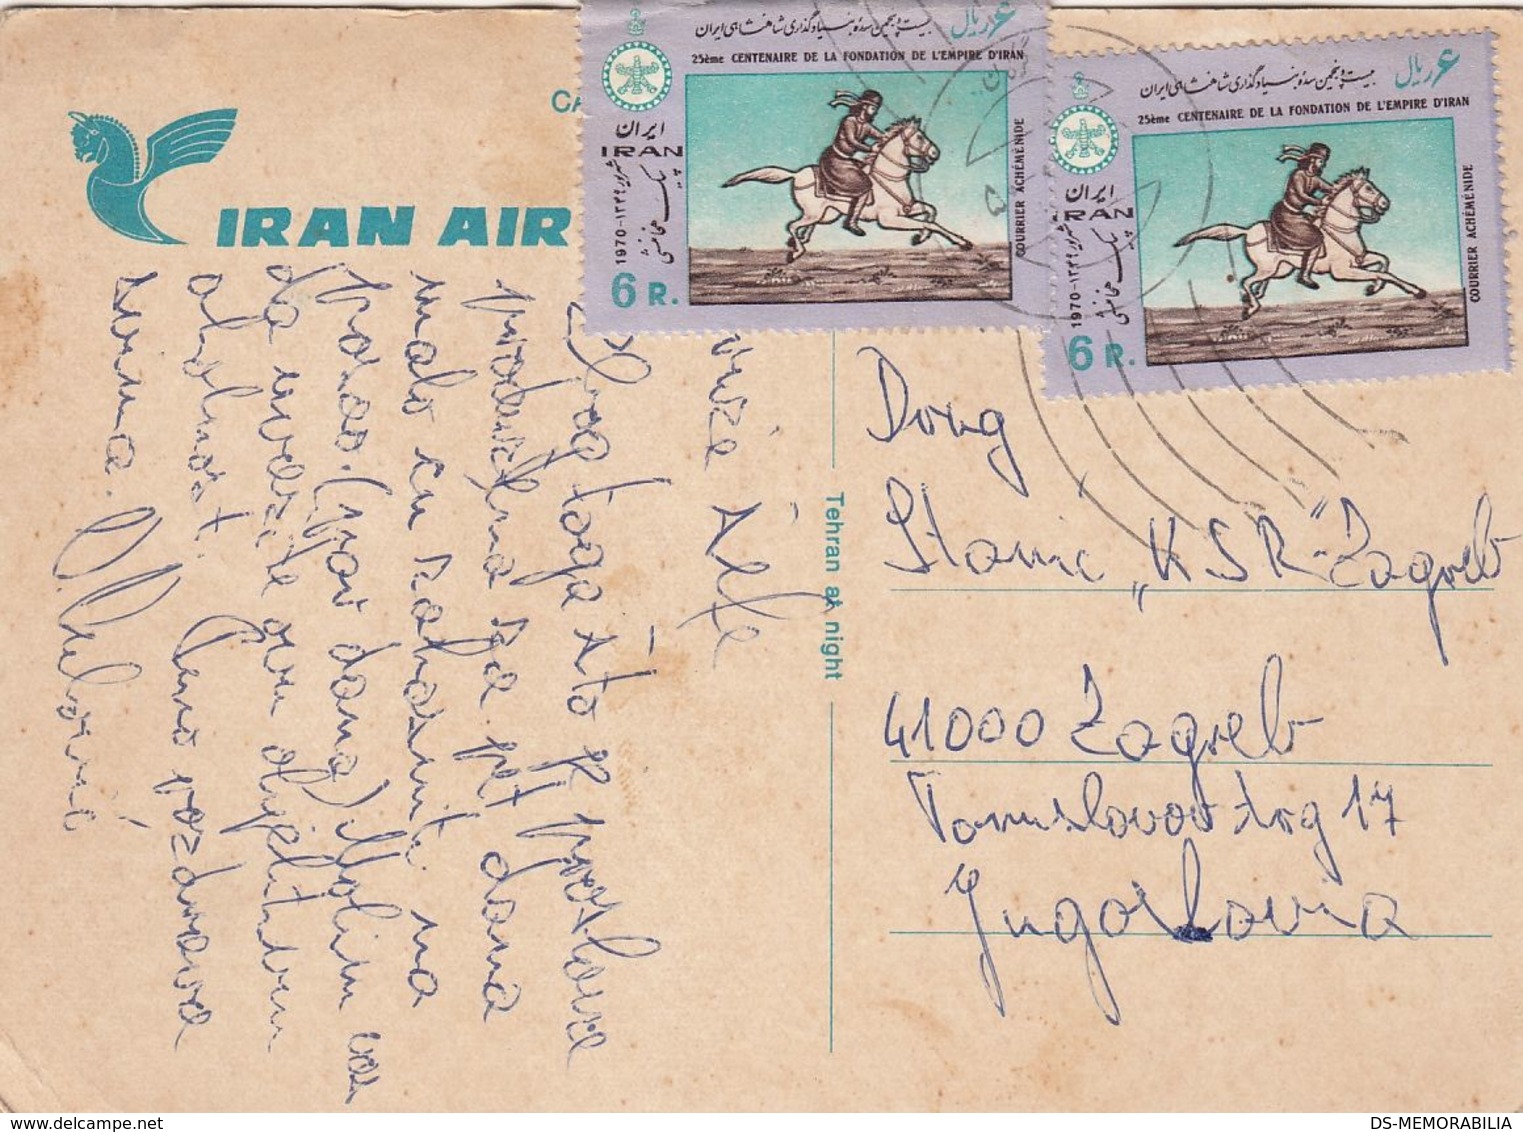 TEHRAN AT NIGHT IRAN AIR AIRLINE ISSUE POSTCARD NICE STAMPS - Iran